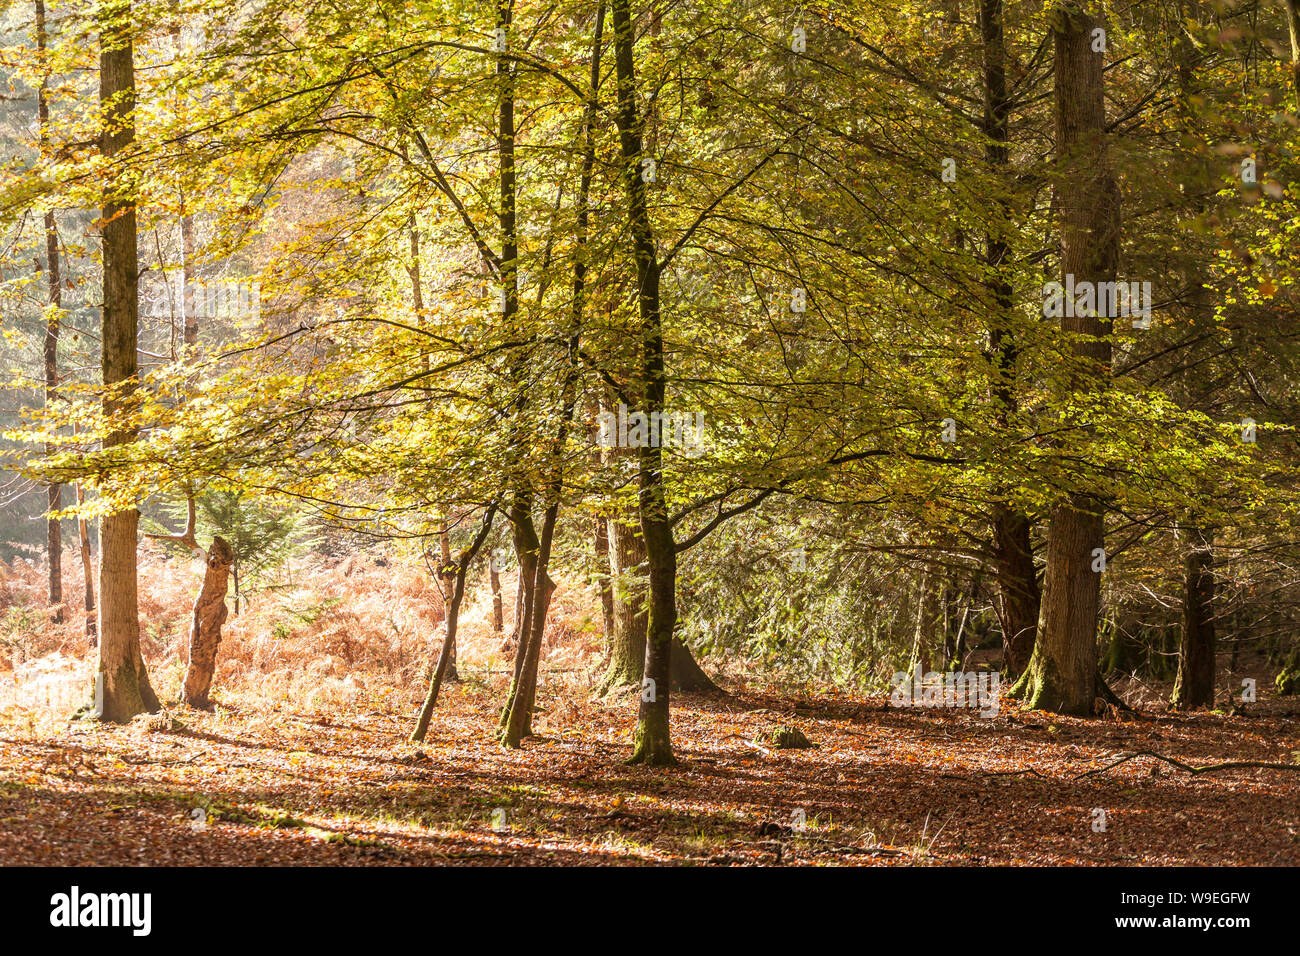 Autumn colour in the New Forest national park, UK. Stock Photo